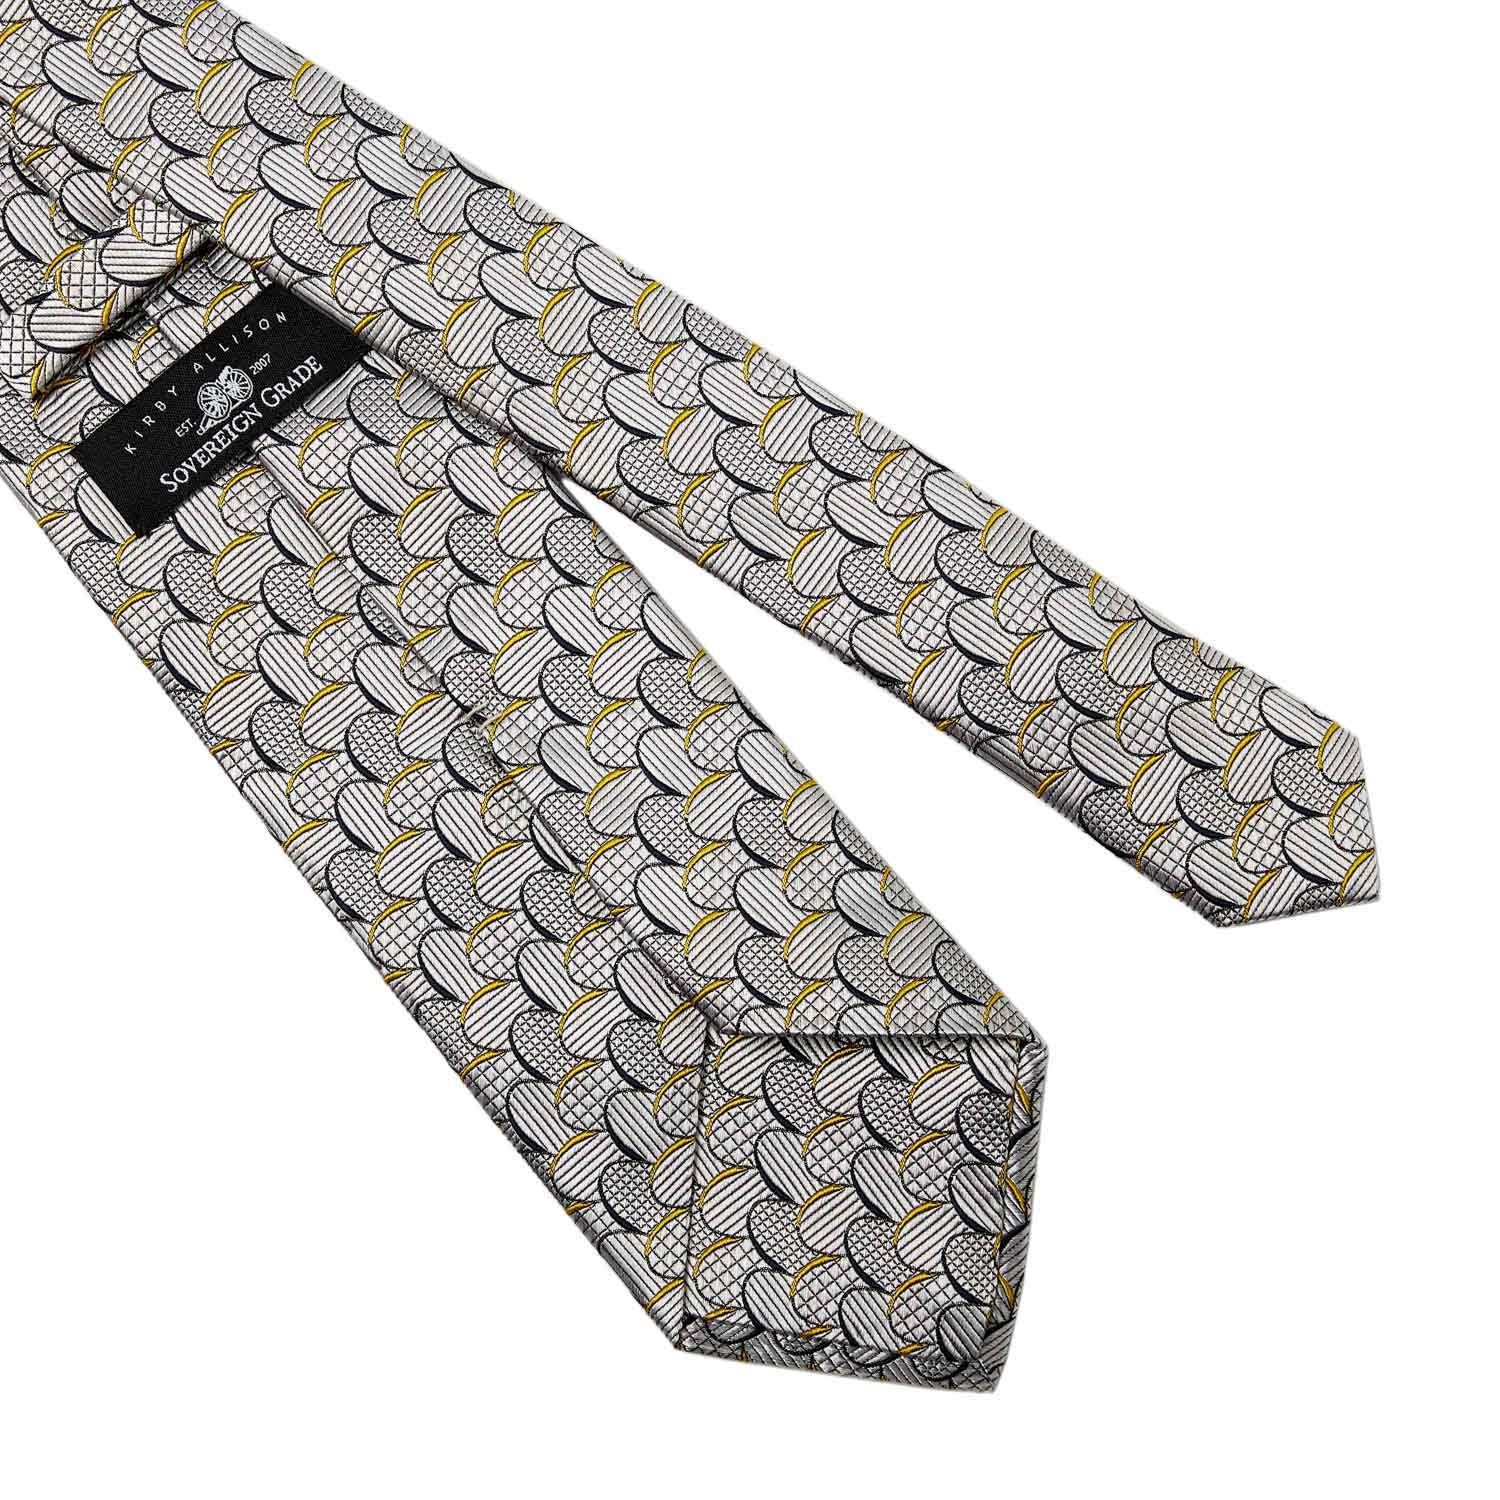 A handmade Sovereign Grade Sydney Jacquard Tie with circles, designed in the United Kingdom and crafted by KirbyAllison.com.